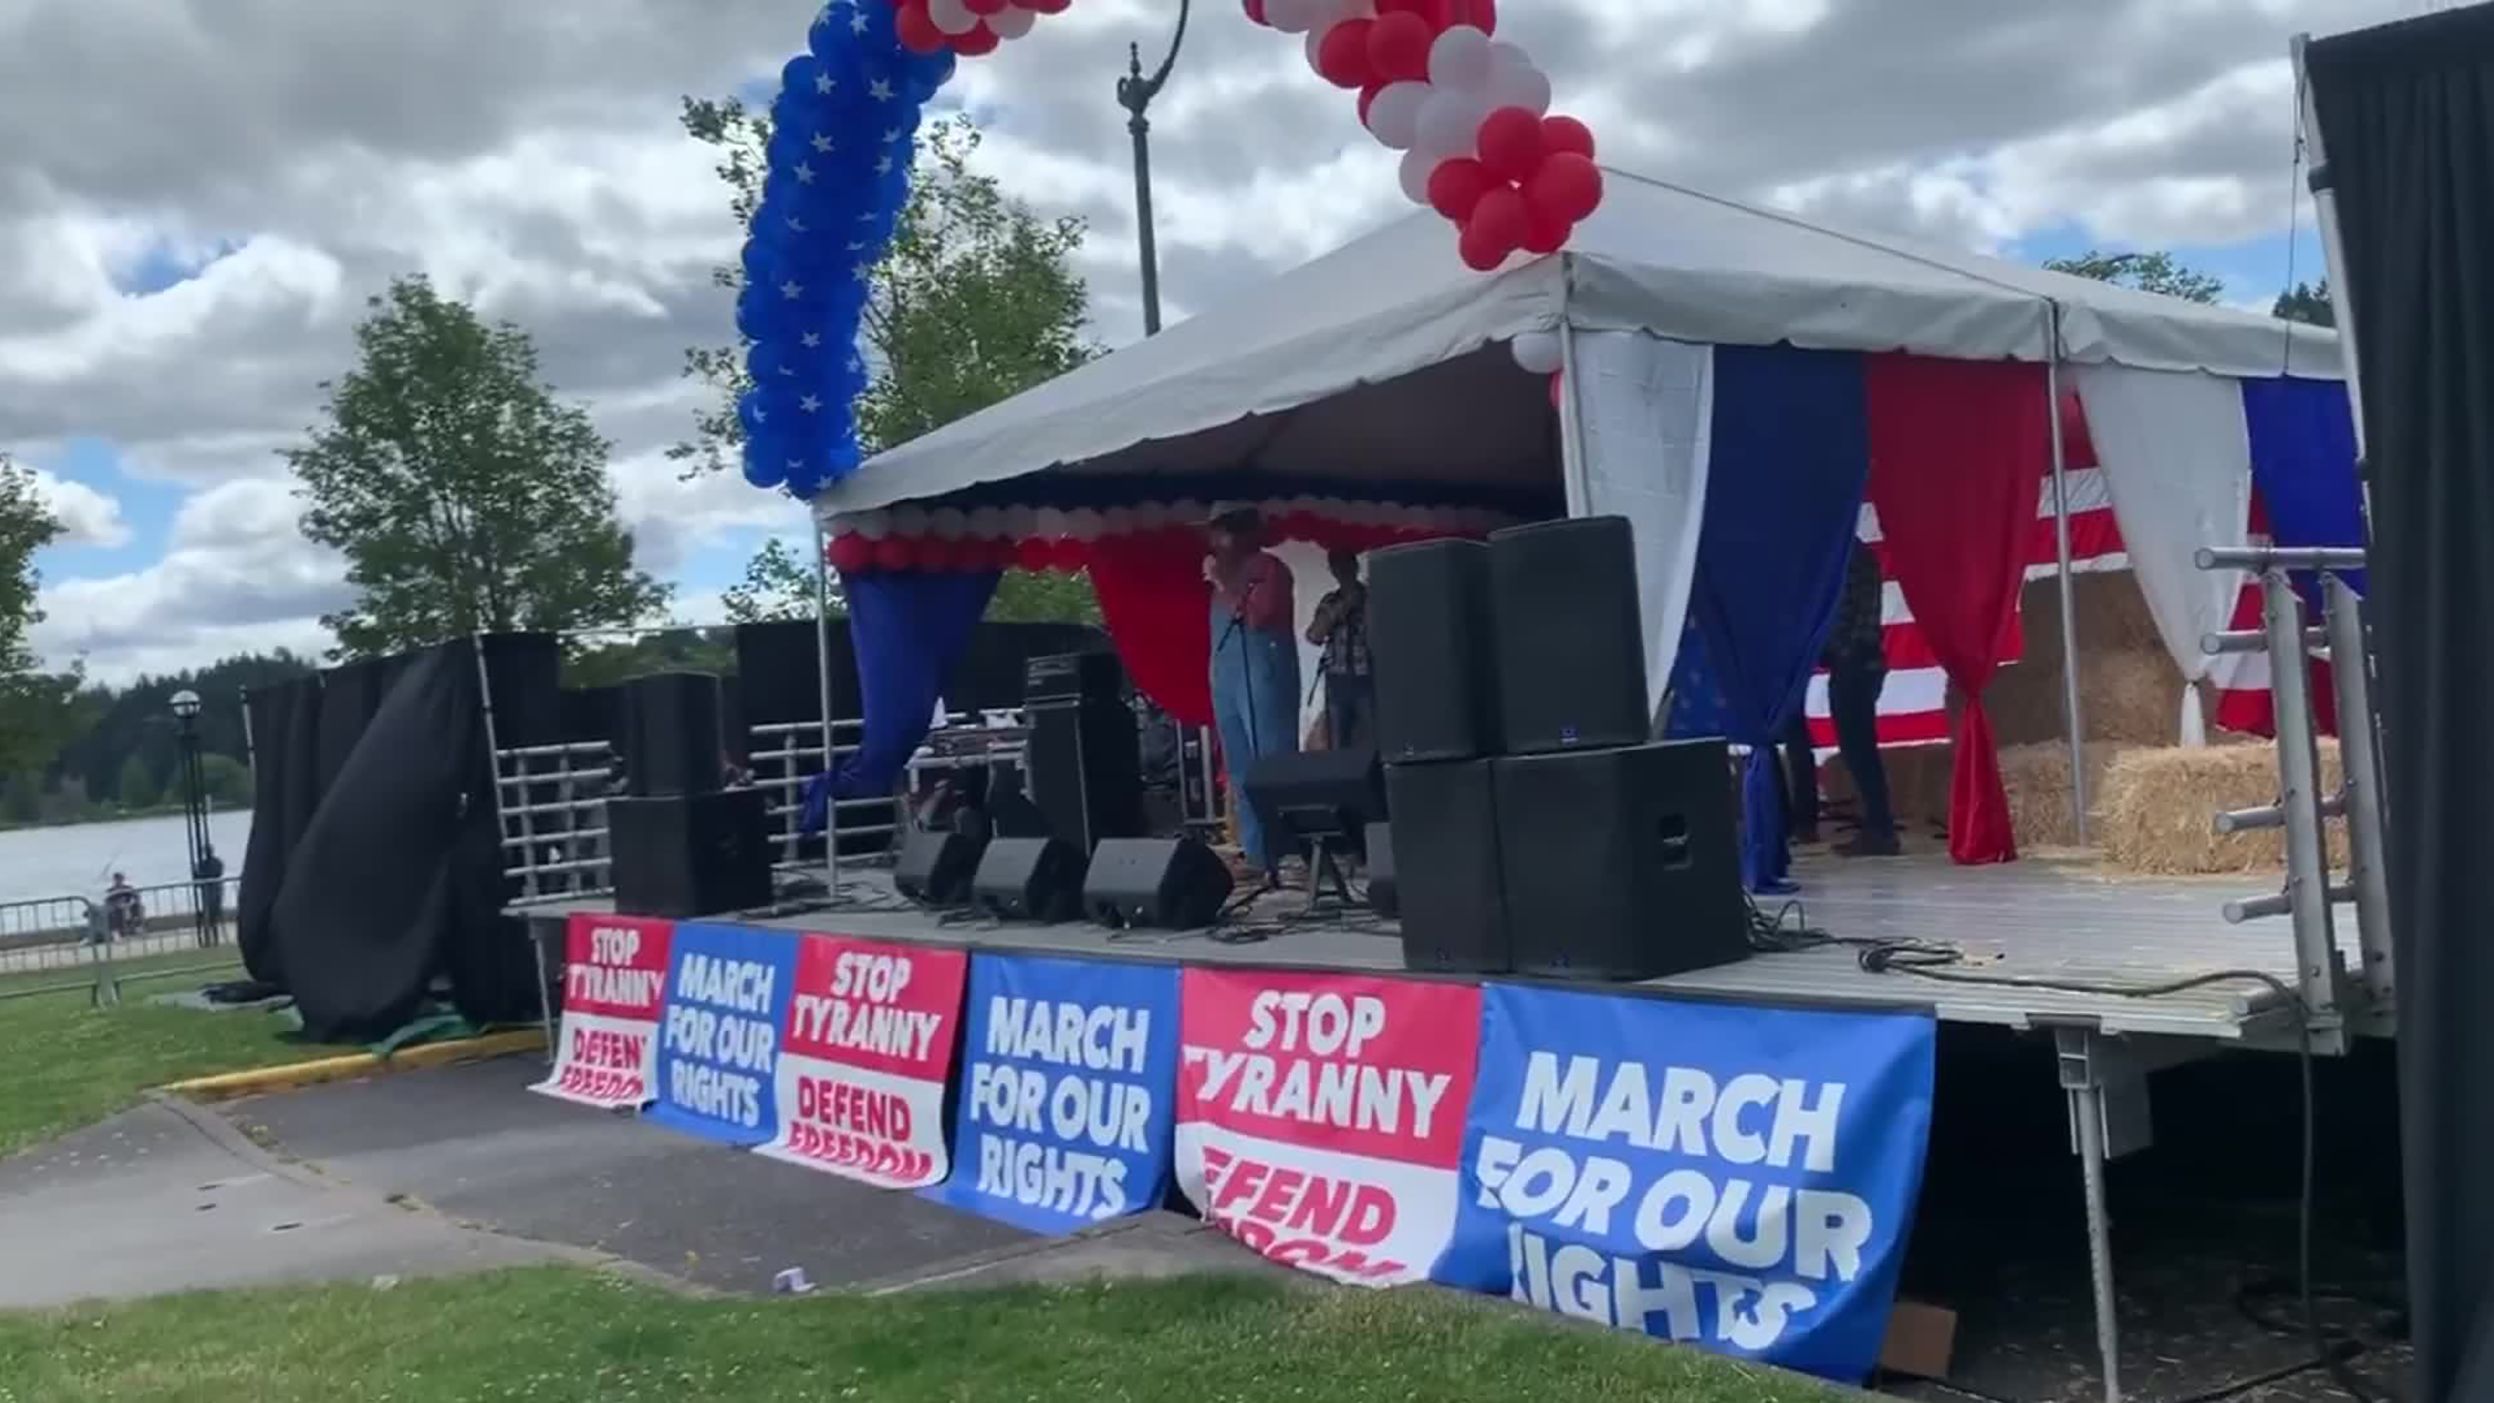 The Olson Bros Band posted a video on Facebook from the event saying, "Had no idea what we were getting into today but apparently we opened for Sacha Baron Cohen at a Trump Rally."